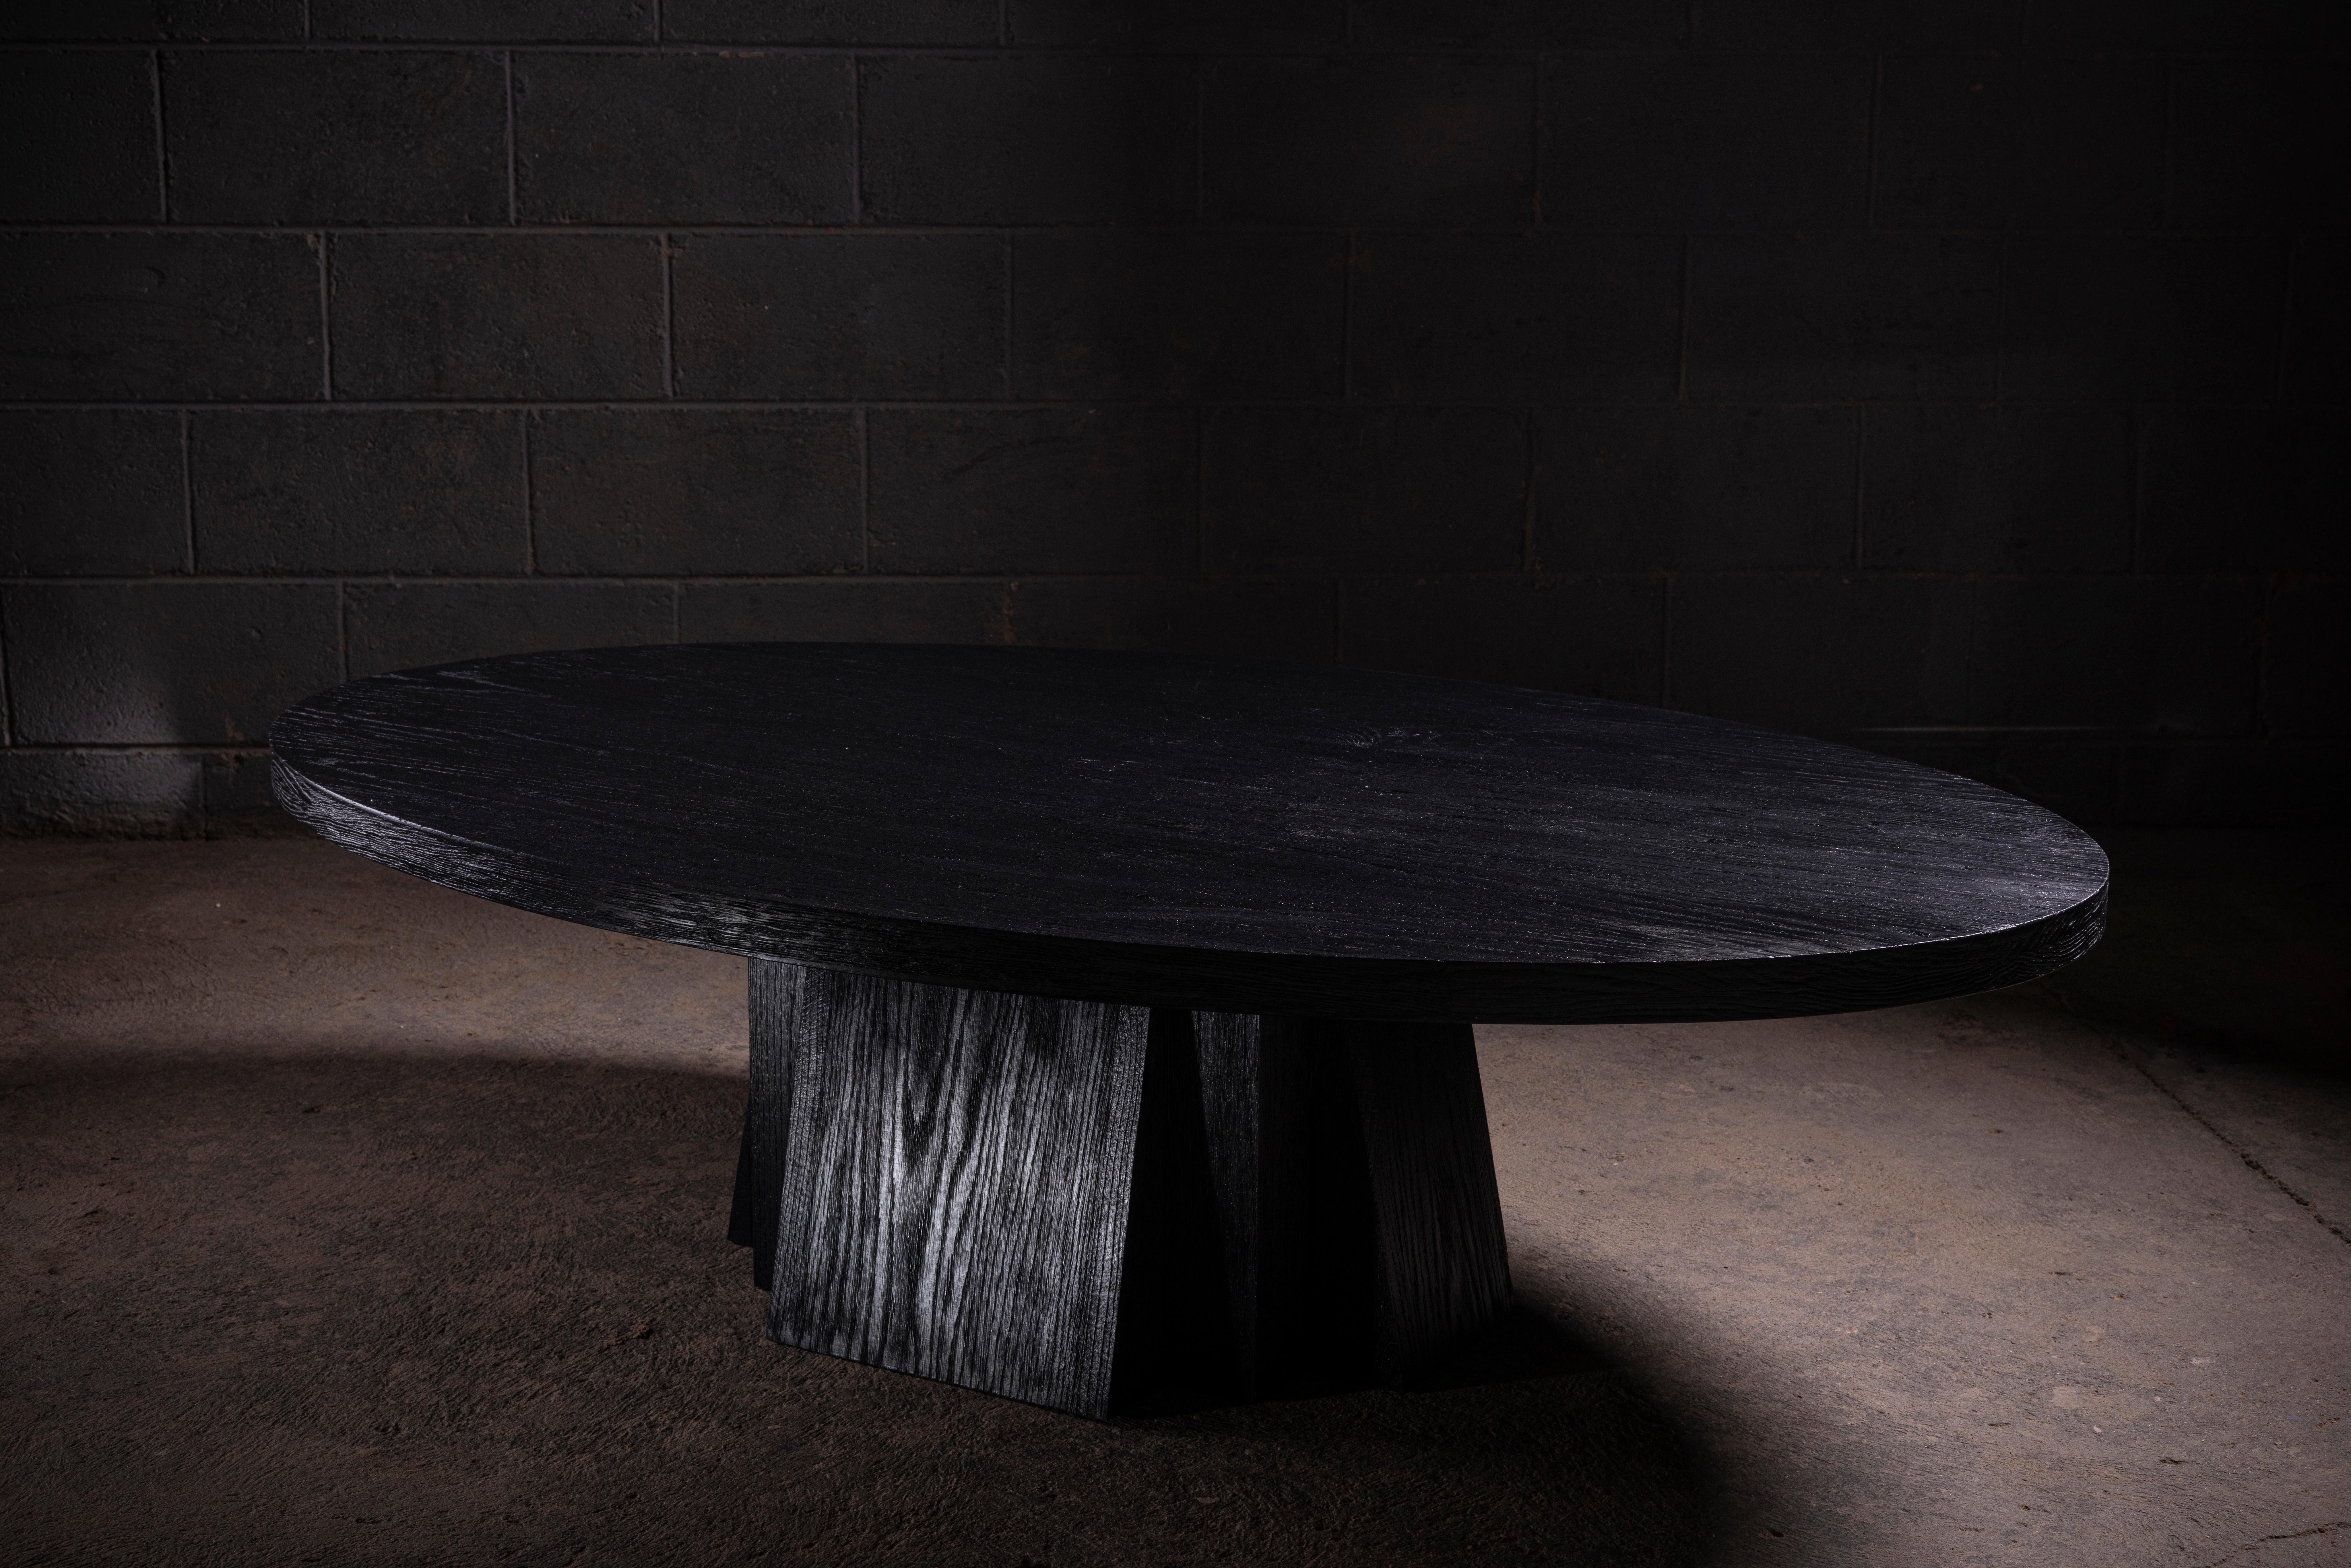 Solid Black Oak Dining Table with Geometric Pedestal, Inspired in Brutalist Architecture 